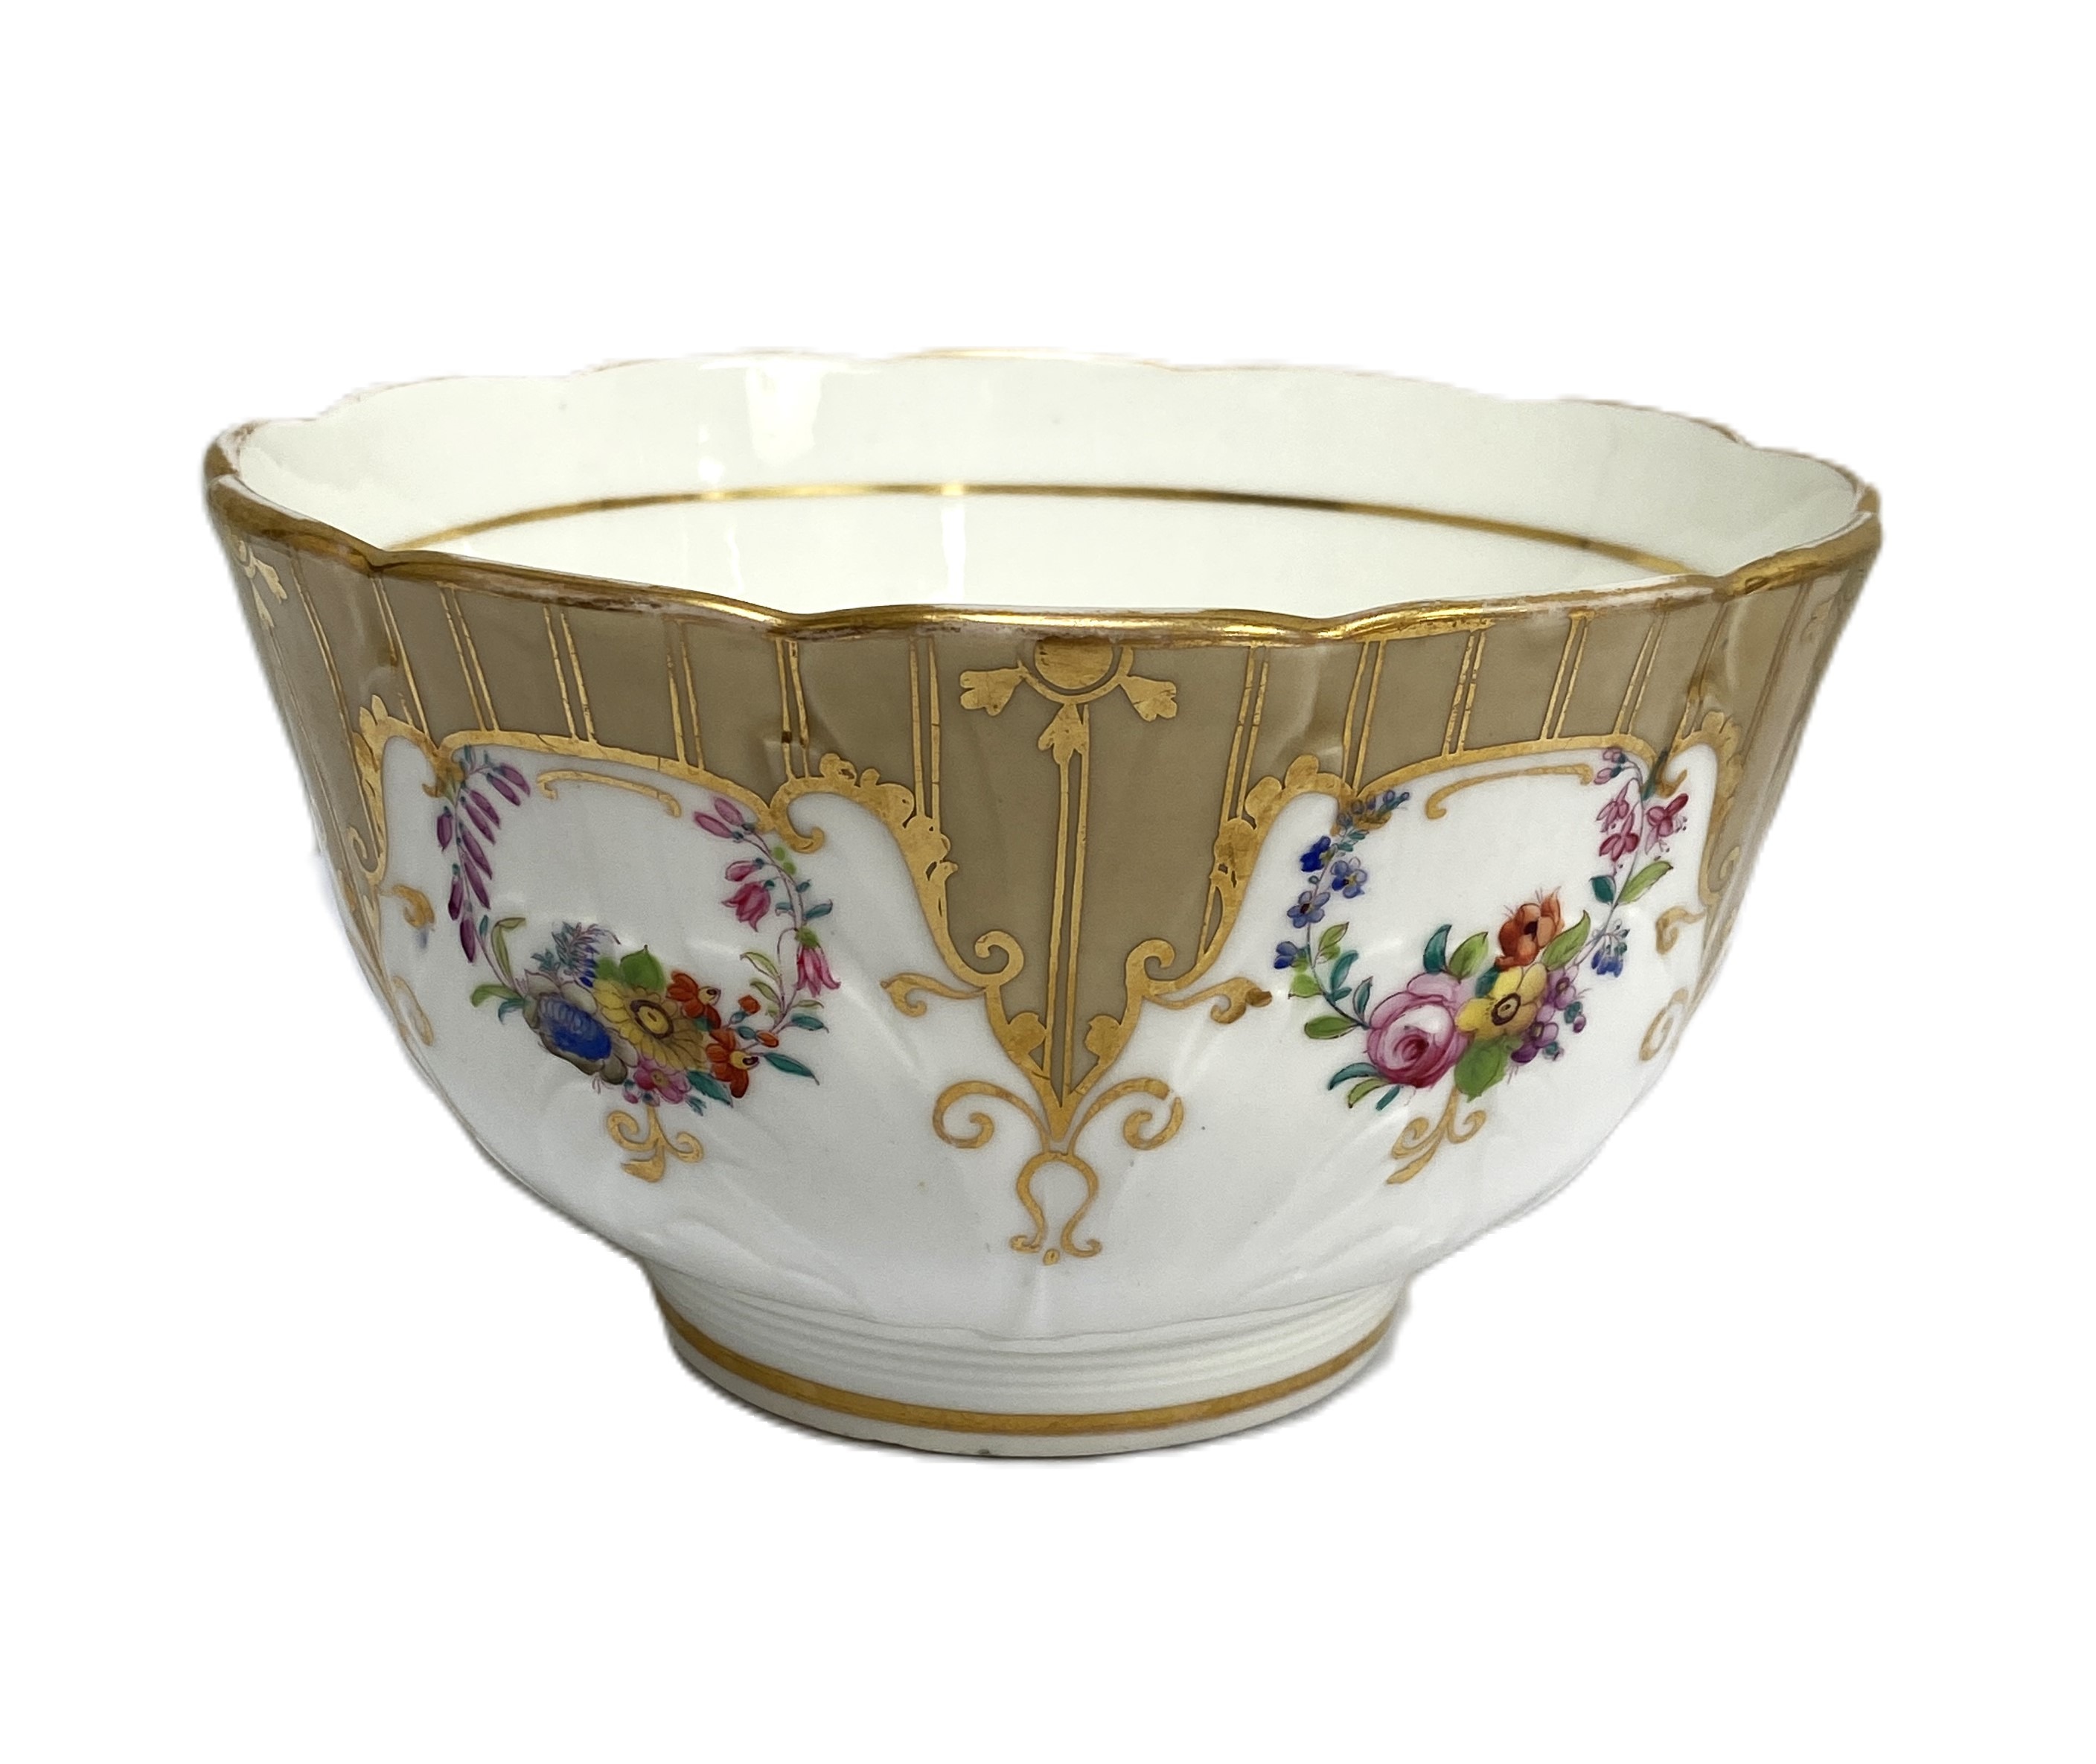 A Wedgewood bone china tea service, decorated with gilt, flowers and motifs on a white ground and - Image 3 of 7